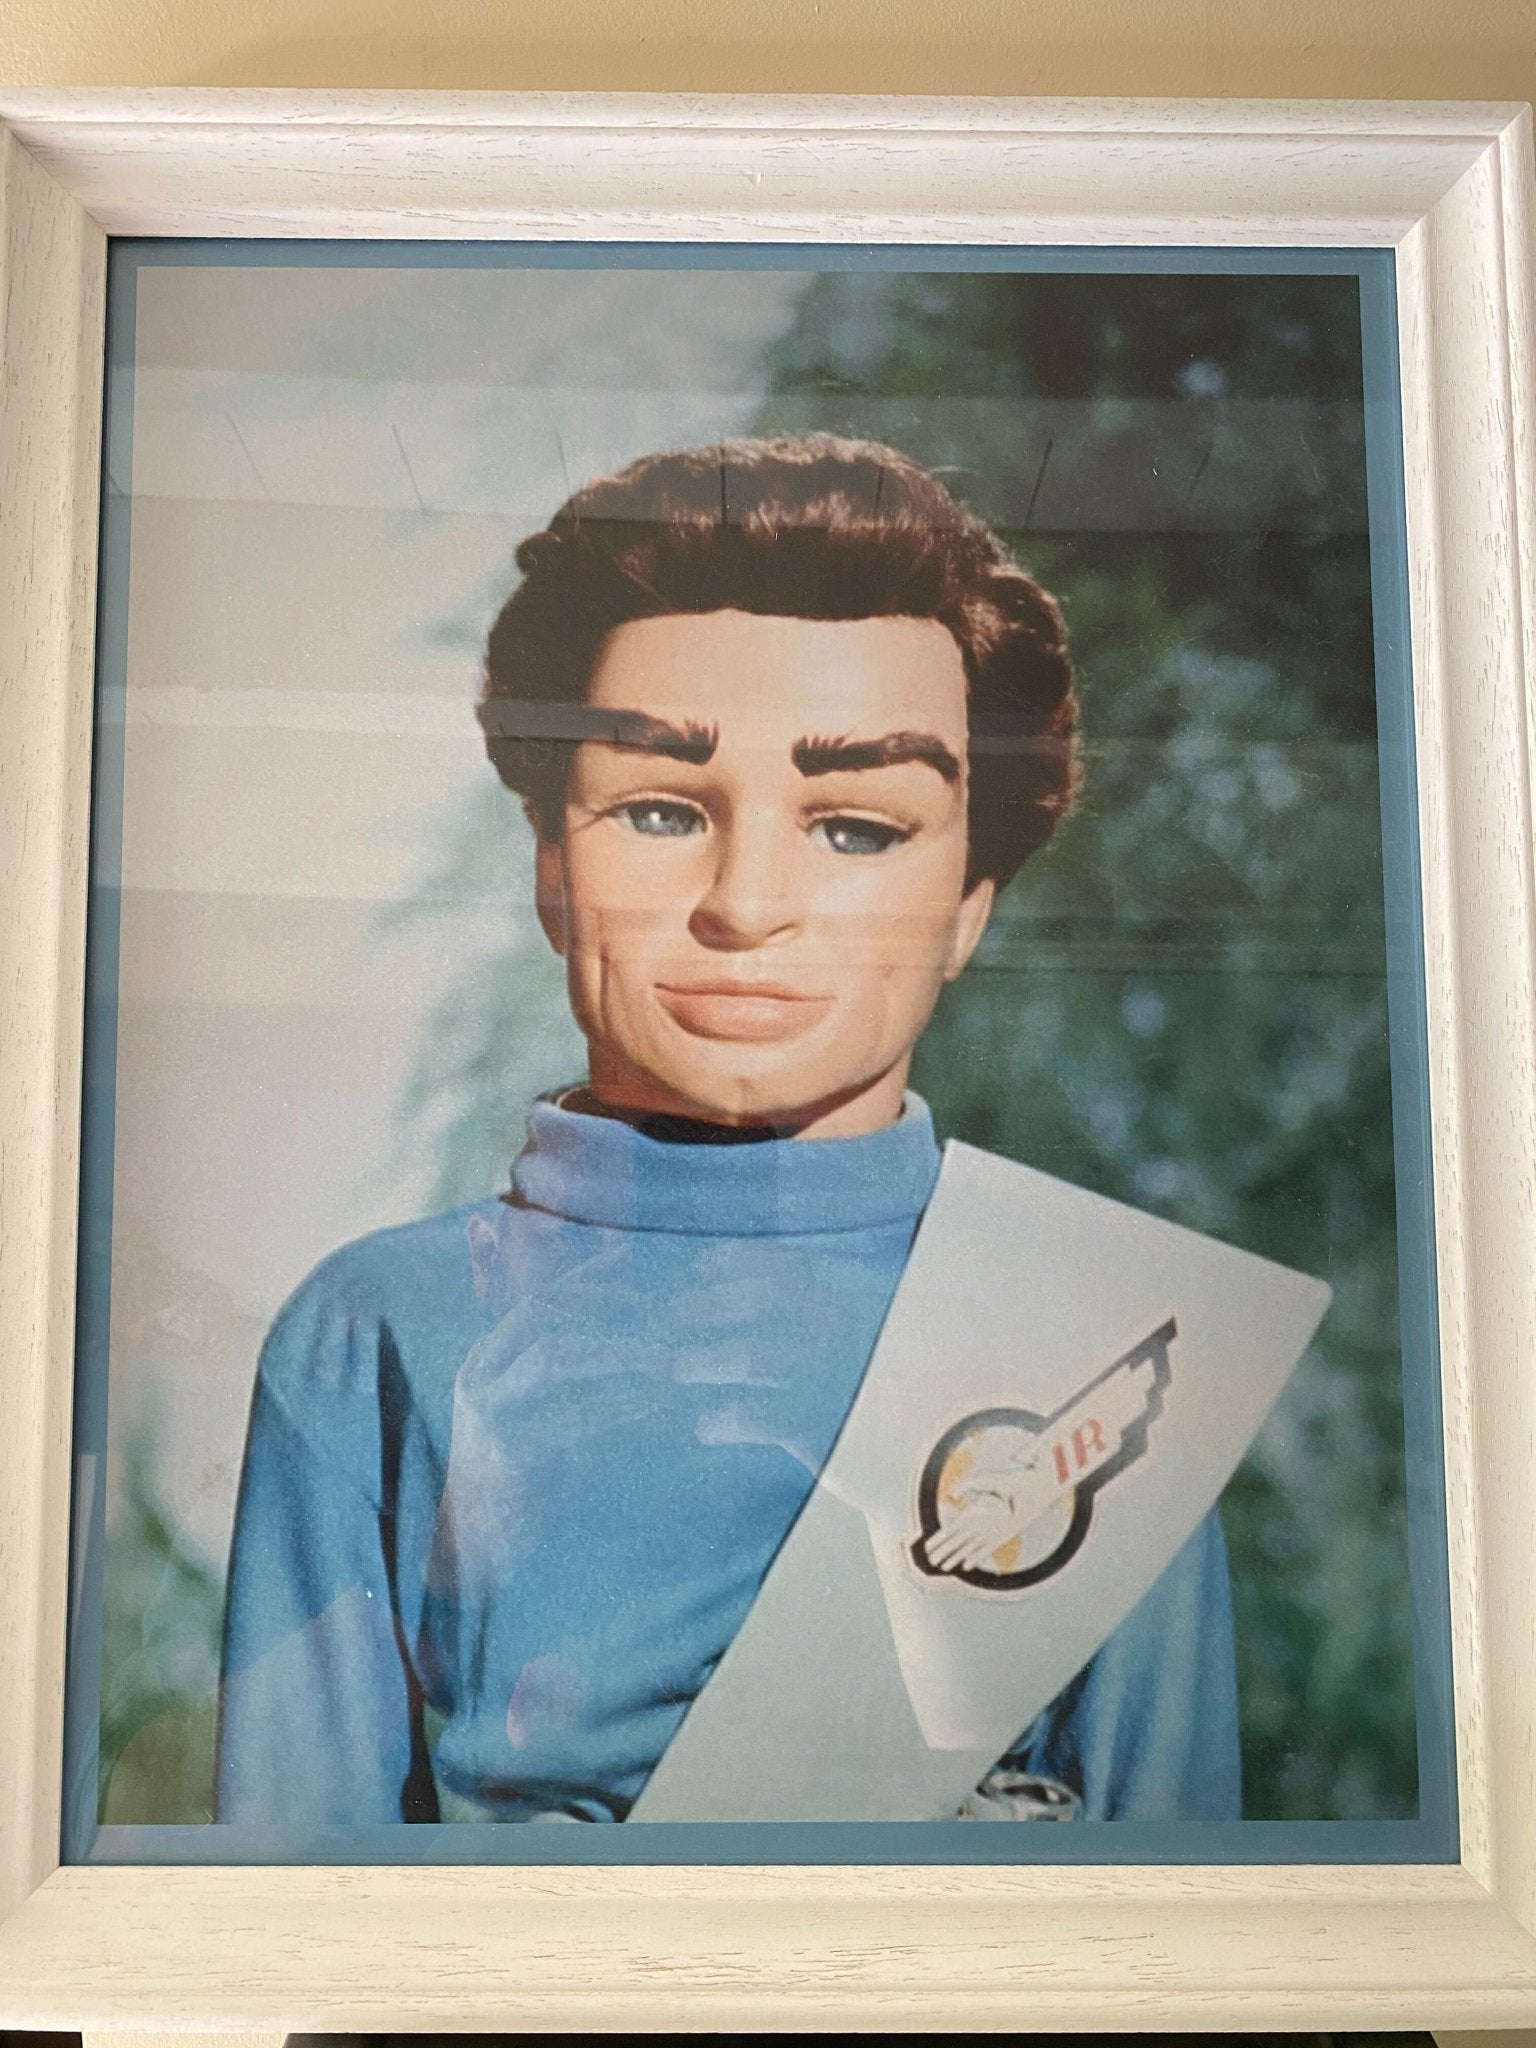 Thunderbird 5 Calling Insiders– Your Opinion Requested - The Gerry Anderson Store